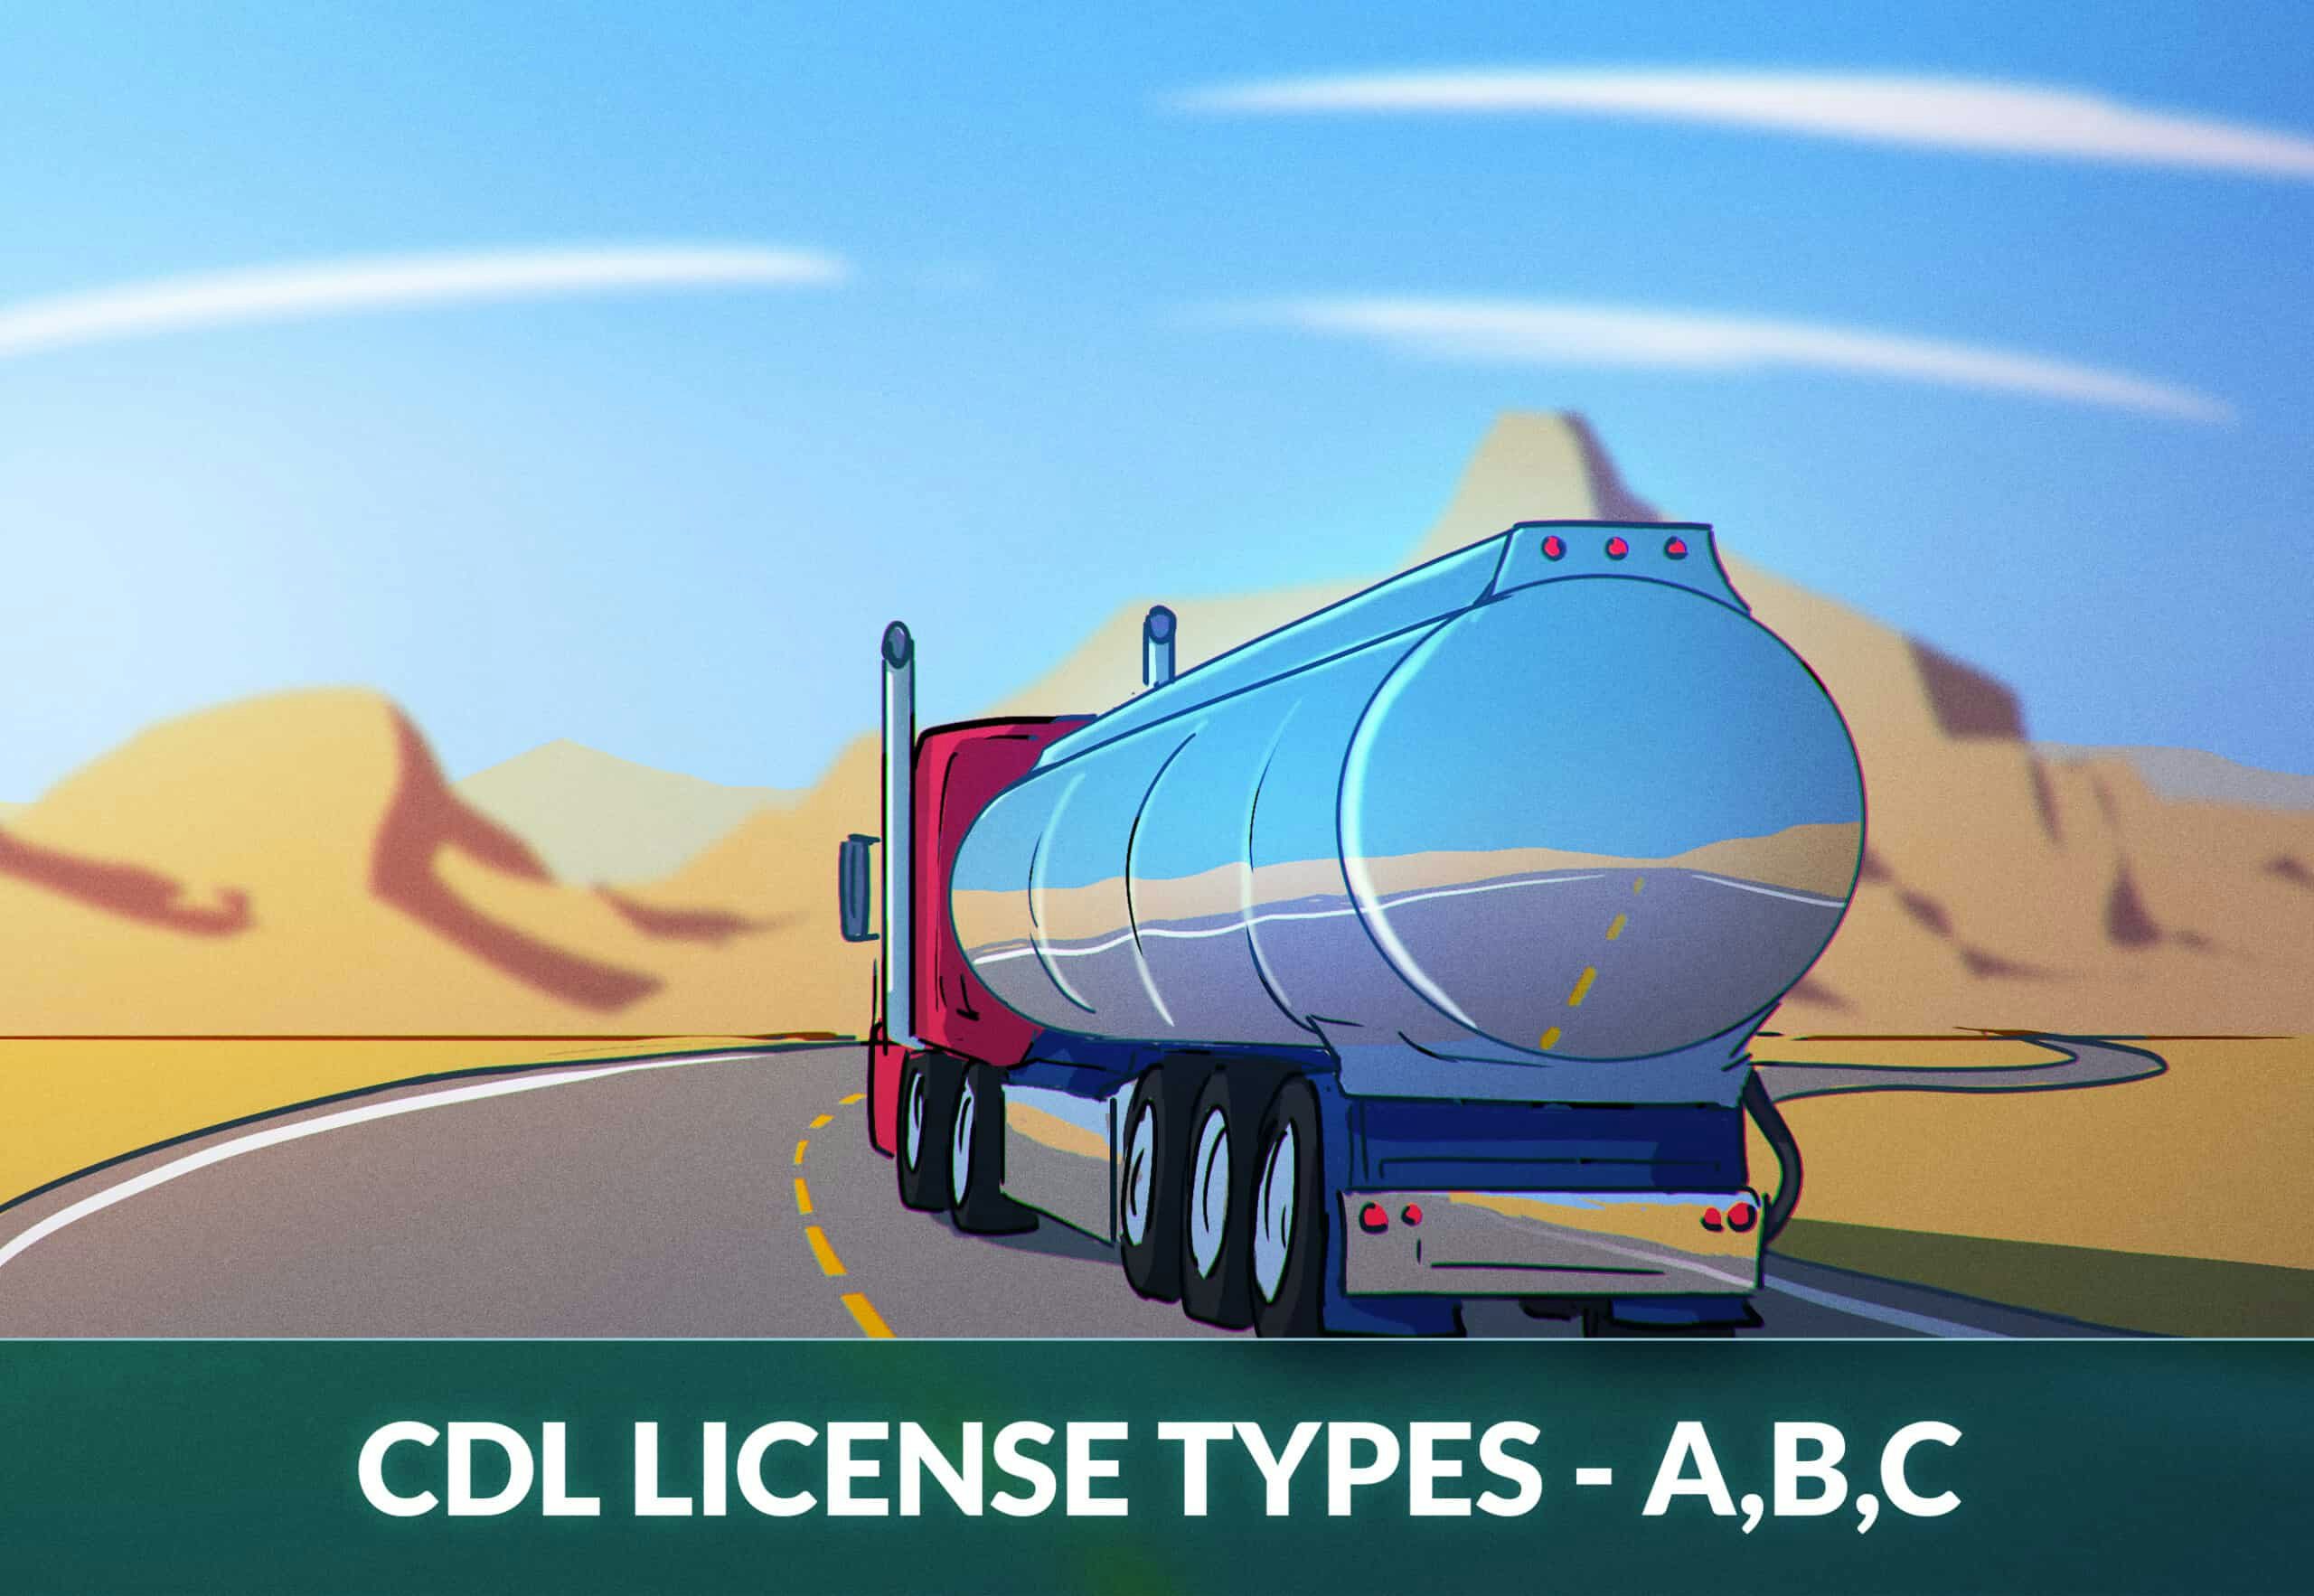 Types of CDL license classes